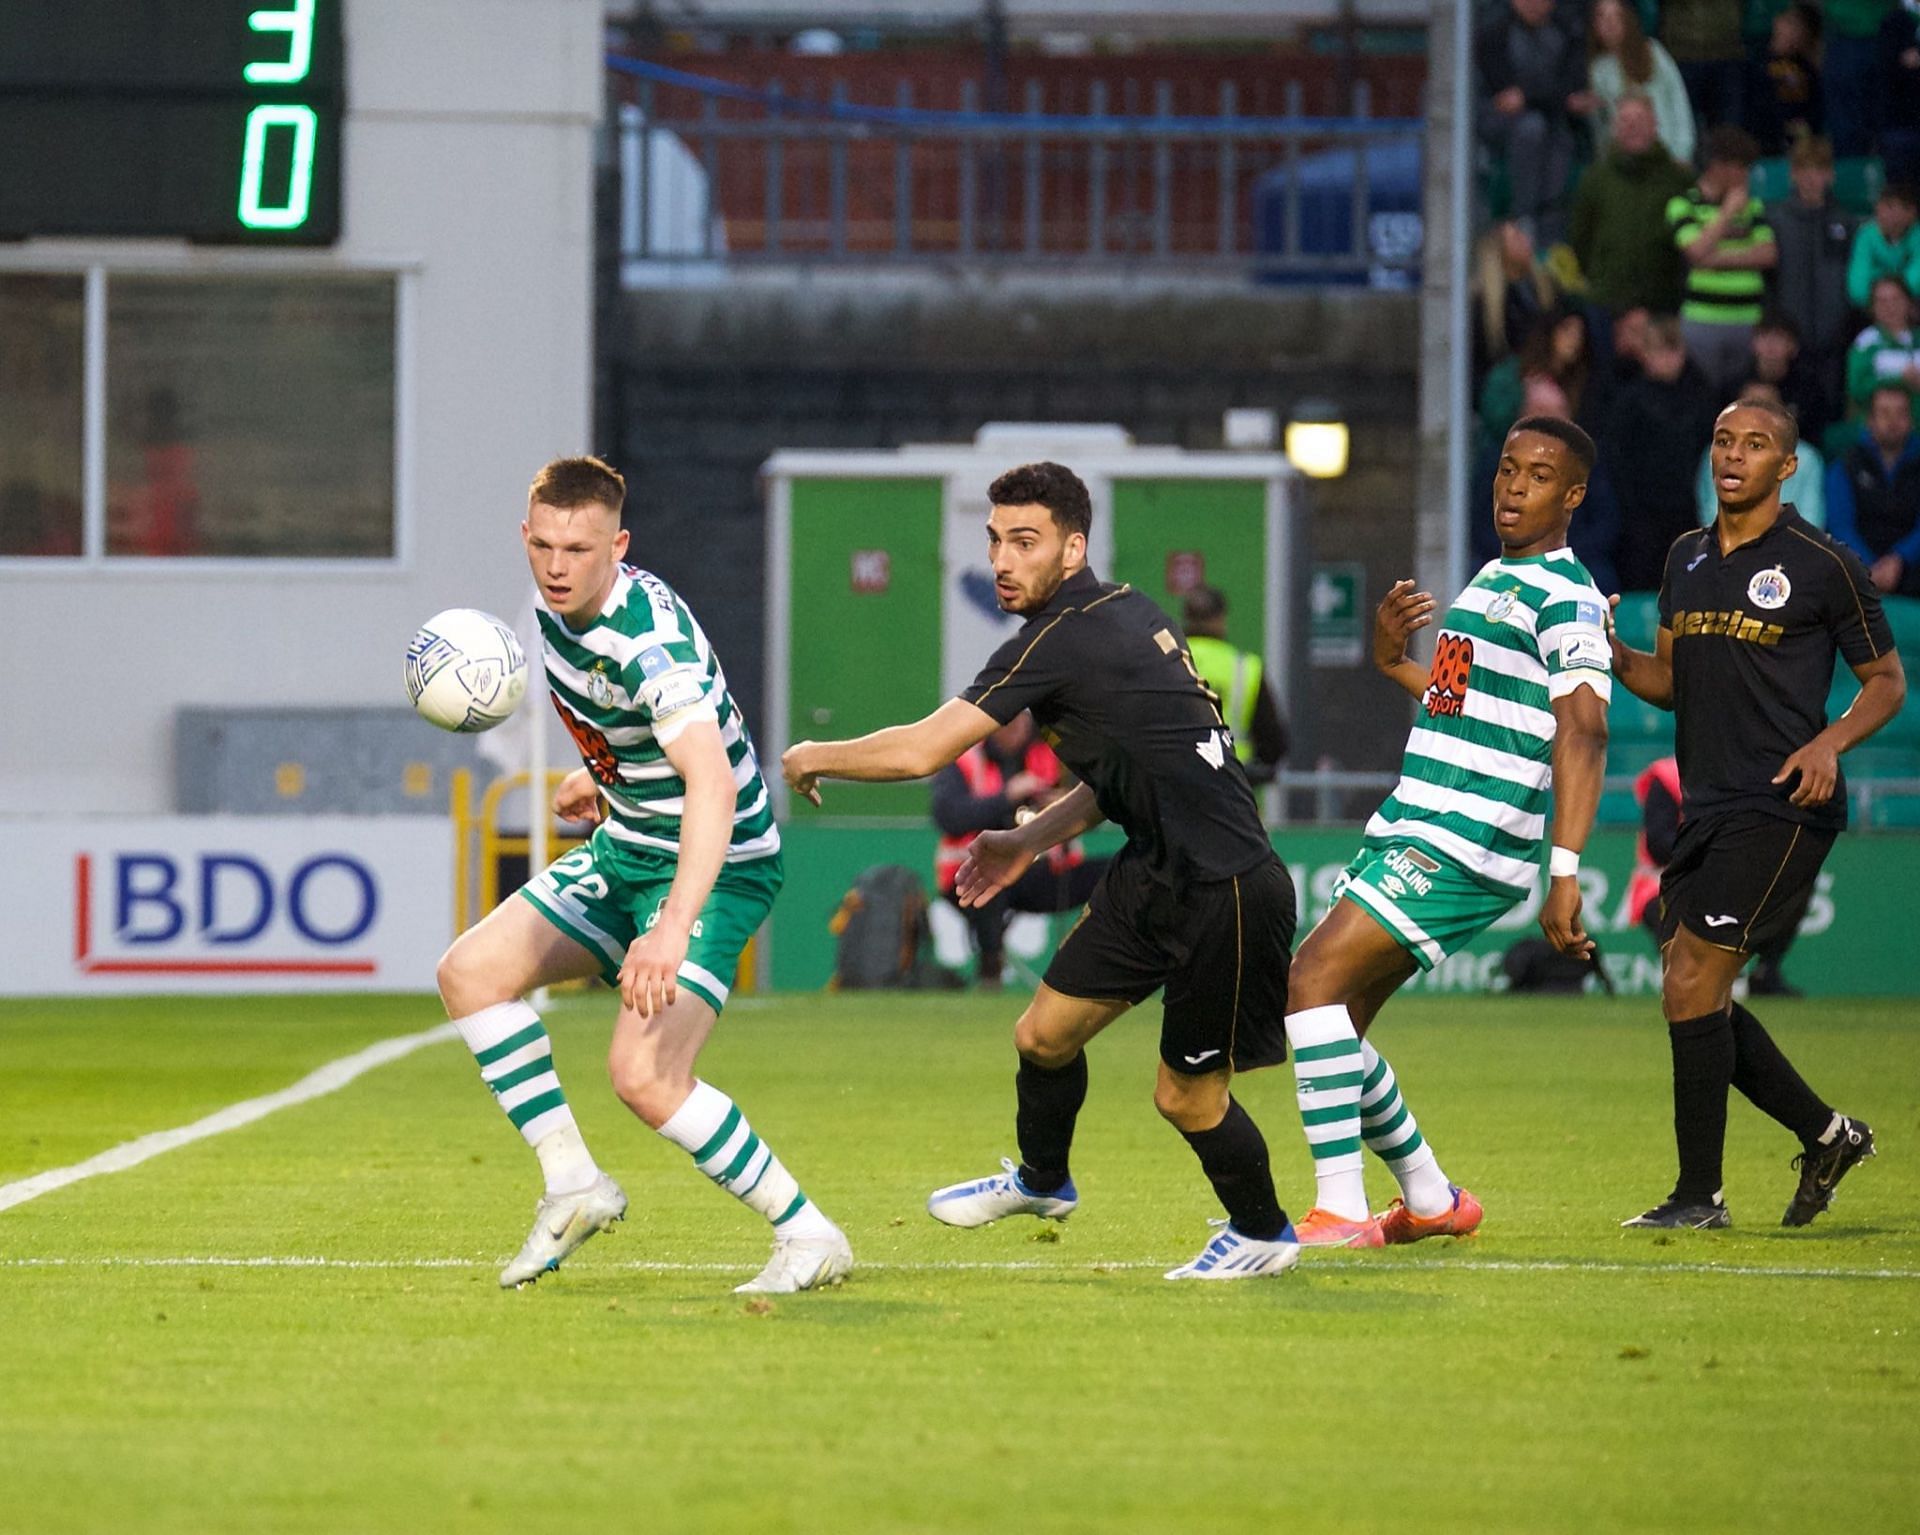 Shamrock Rovers take on Hibernians in their UEFA Champions League qualifying fixture on Tuesday